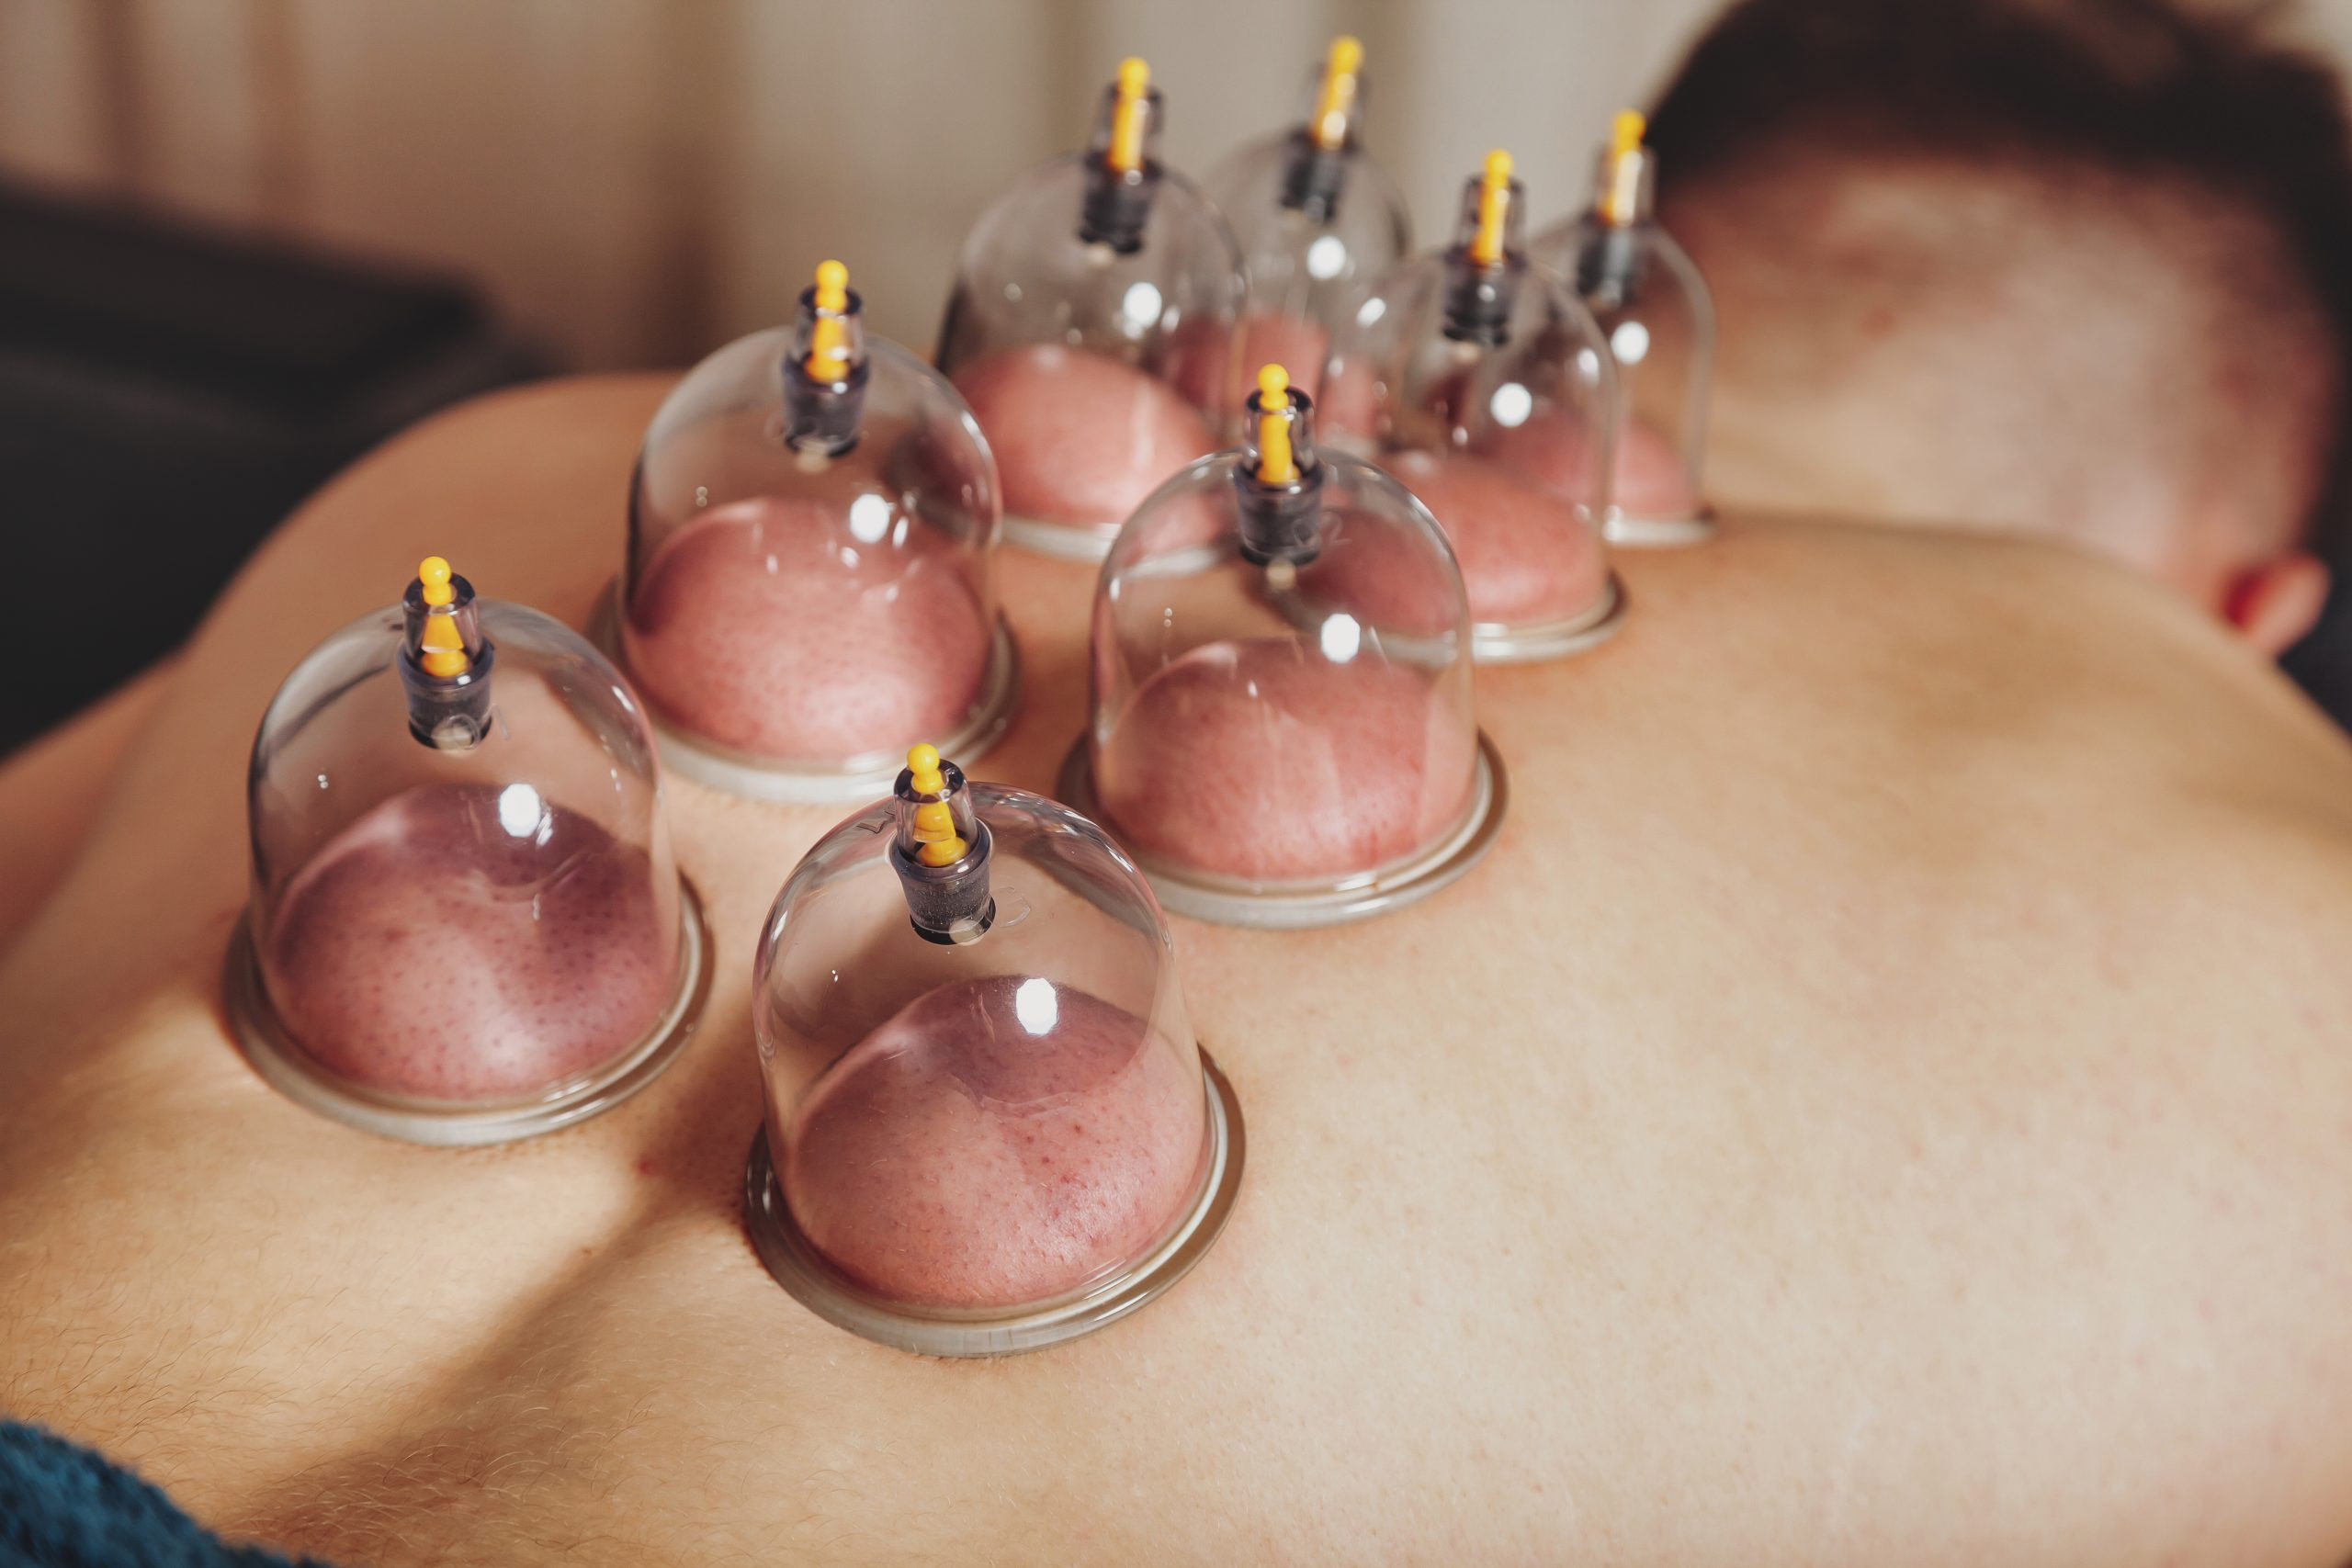 Nerve mobilization cupping